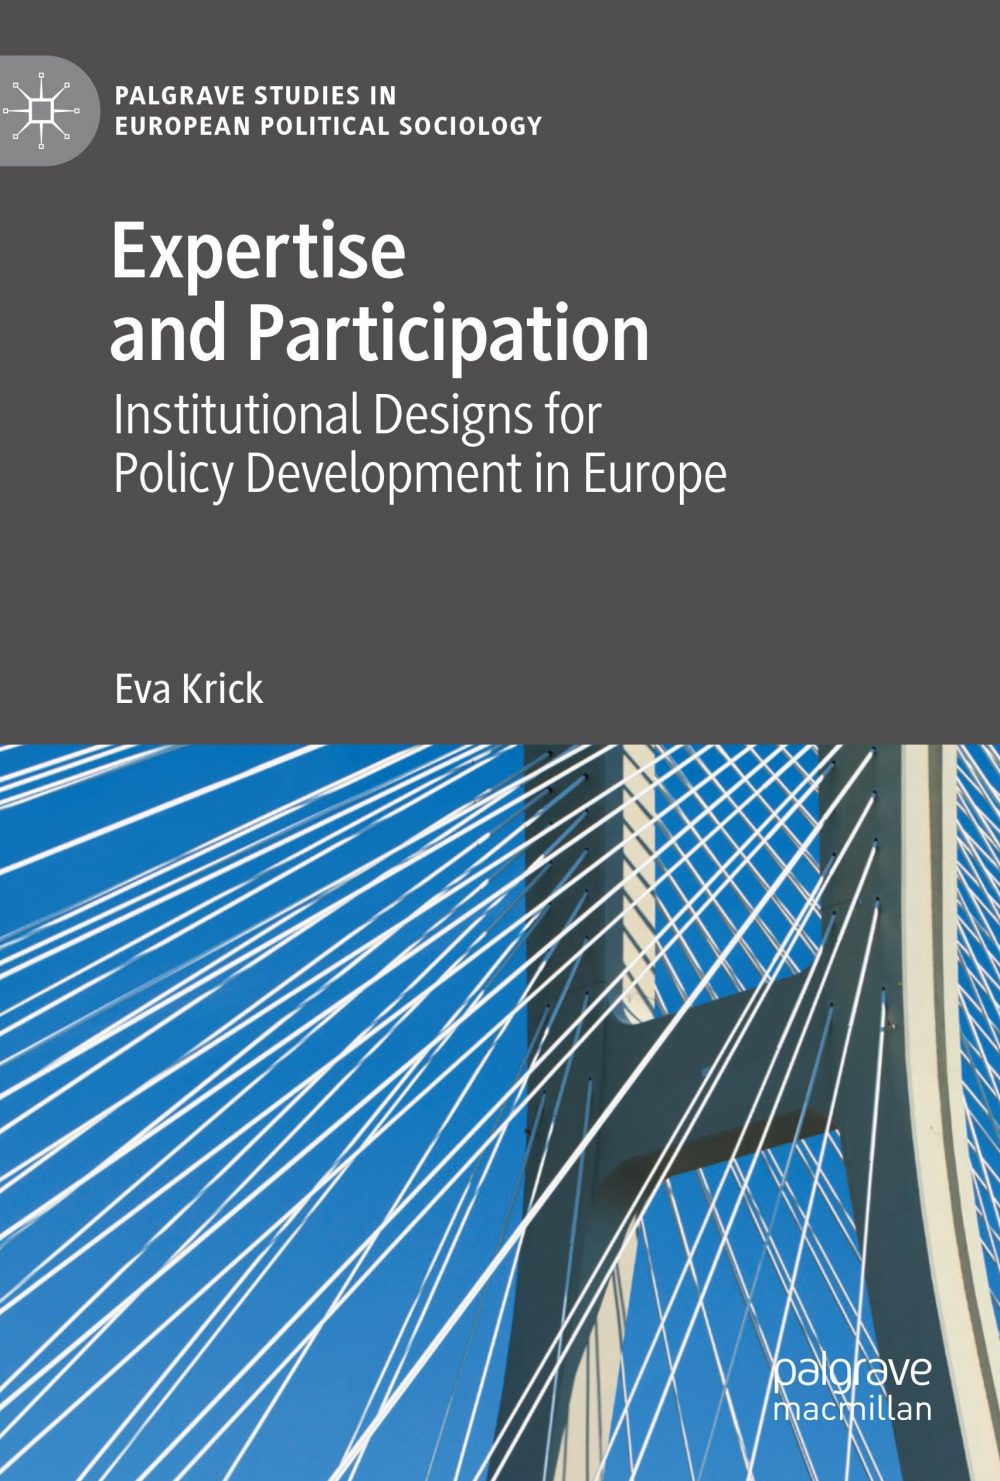 Front cover of Expertise and Participation by Eva Krick